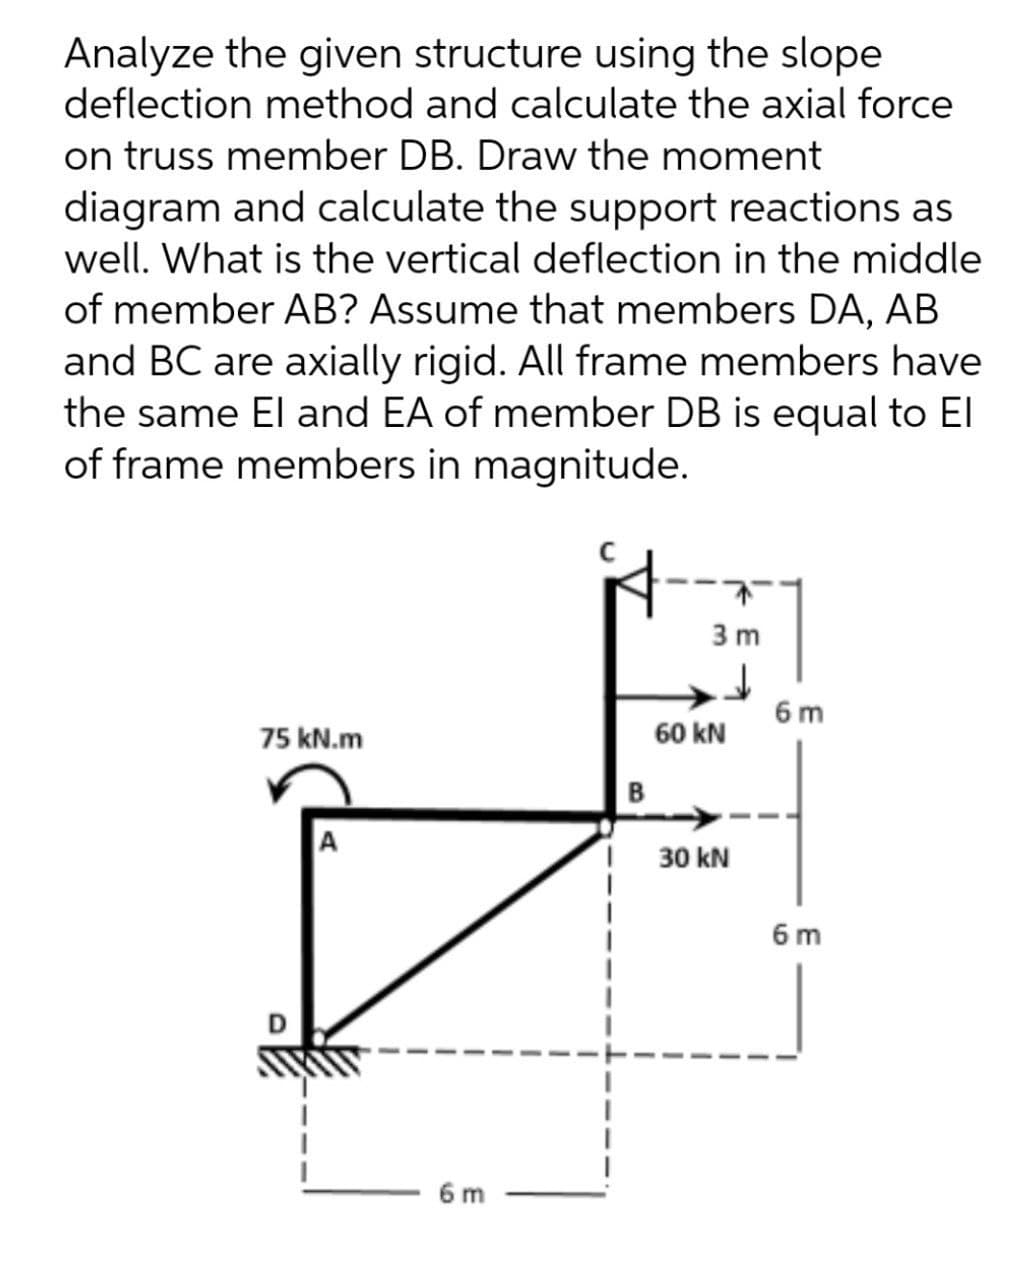 Analyze the given structure using the slope
deflection method and calculate the axial force
on truss member DB. Draw the moment
diagram and calculate the support reactions as
well. What is the vertical deflection in the middle
of member AB? Assume that members DA, AB
and BC are axially rigid. All frame members have
the same El and EA of member DB is equal to El
of frame members in magnitude.
3 m
6 m
75 kN.m
60 kN
B
30 kN
6 m
6 m
